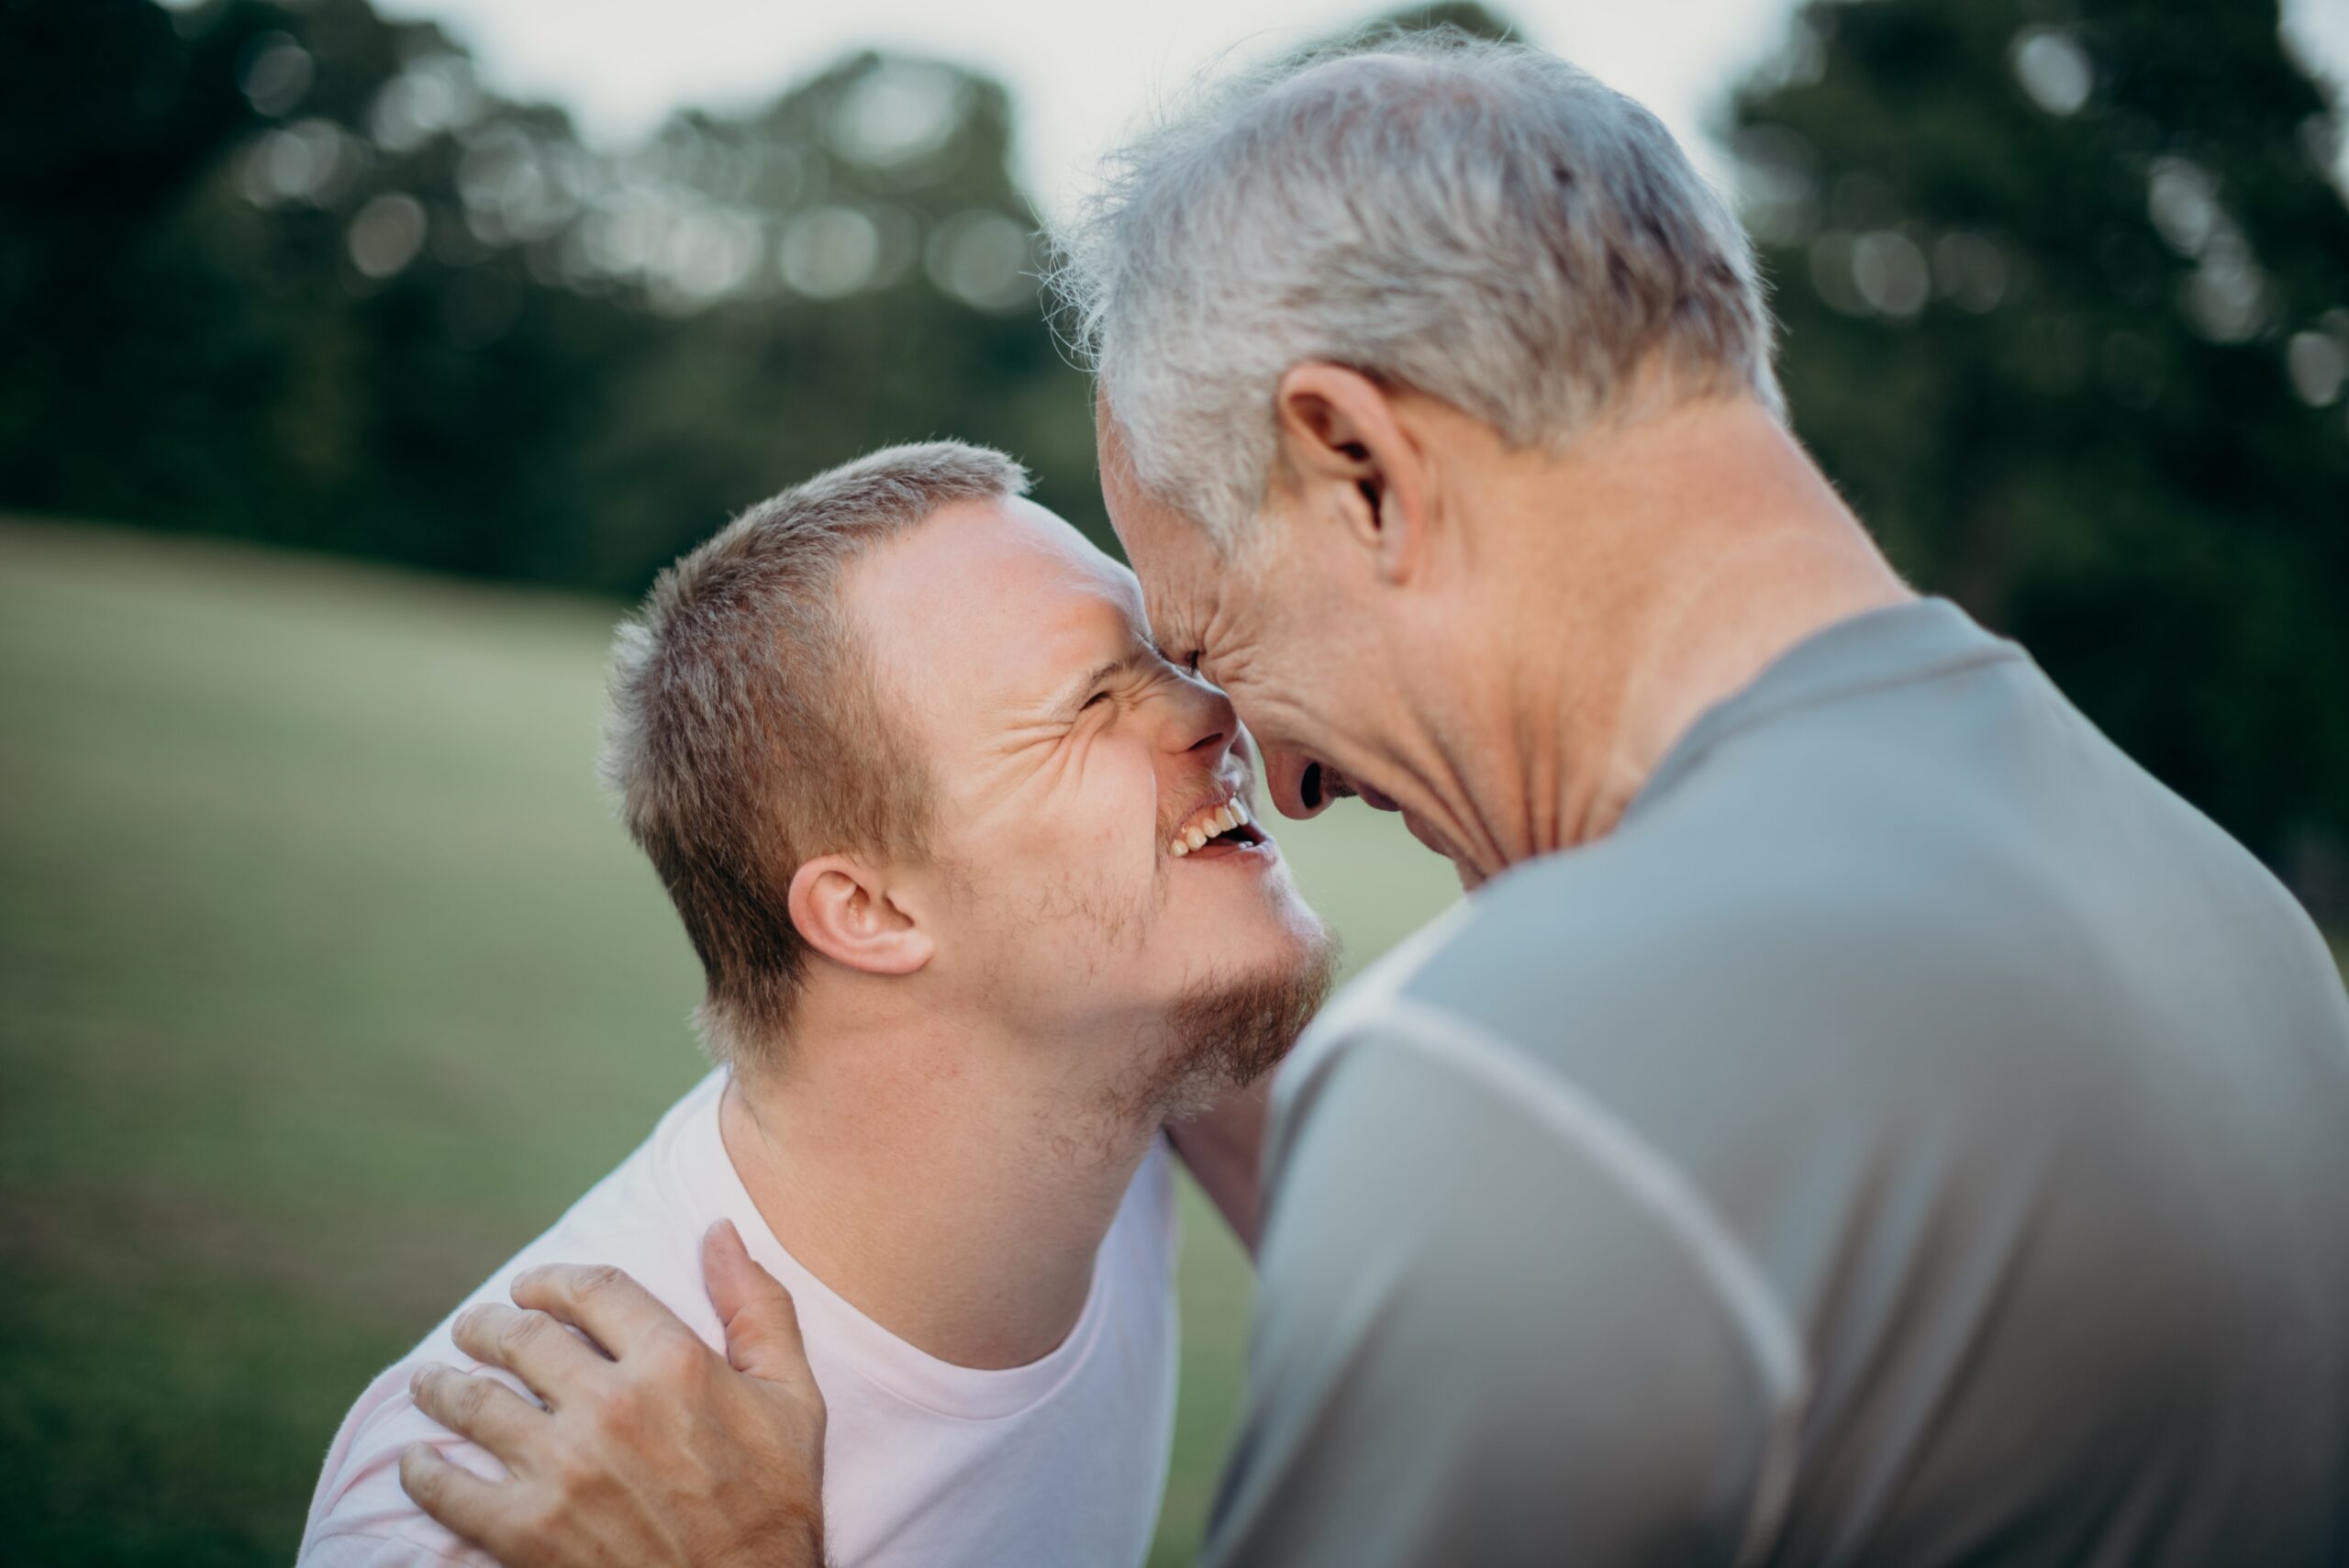 Image of two people laughing together - how to support persons with disabilities image